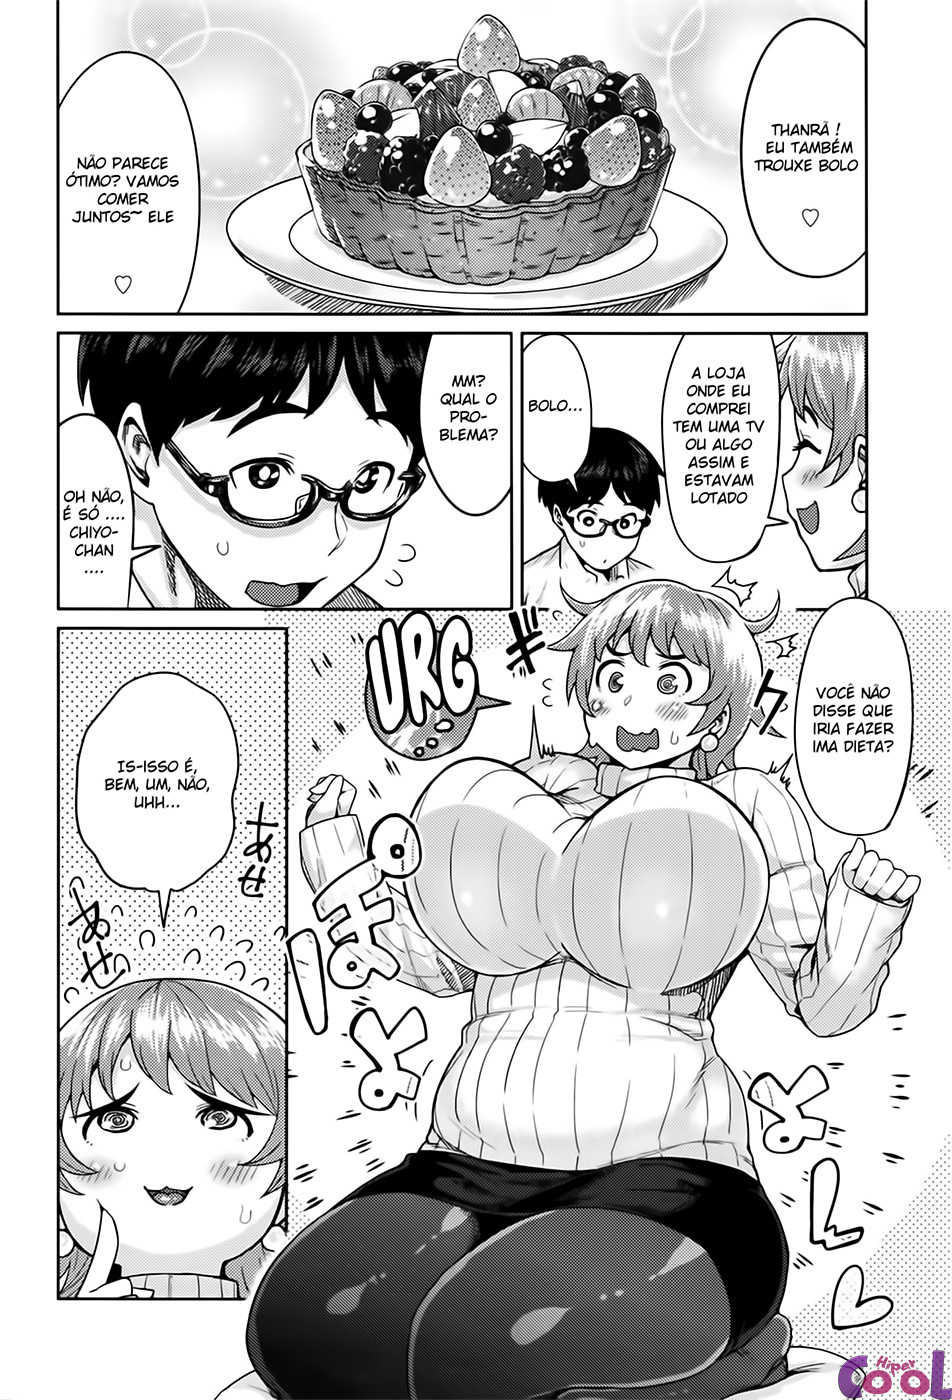 [Methonium] Just Meat To You (COMIC Anthurium 036 2016-04) [Portuguese-BR] - Page 2